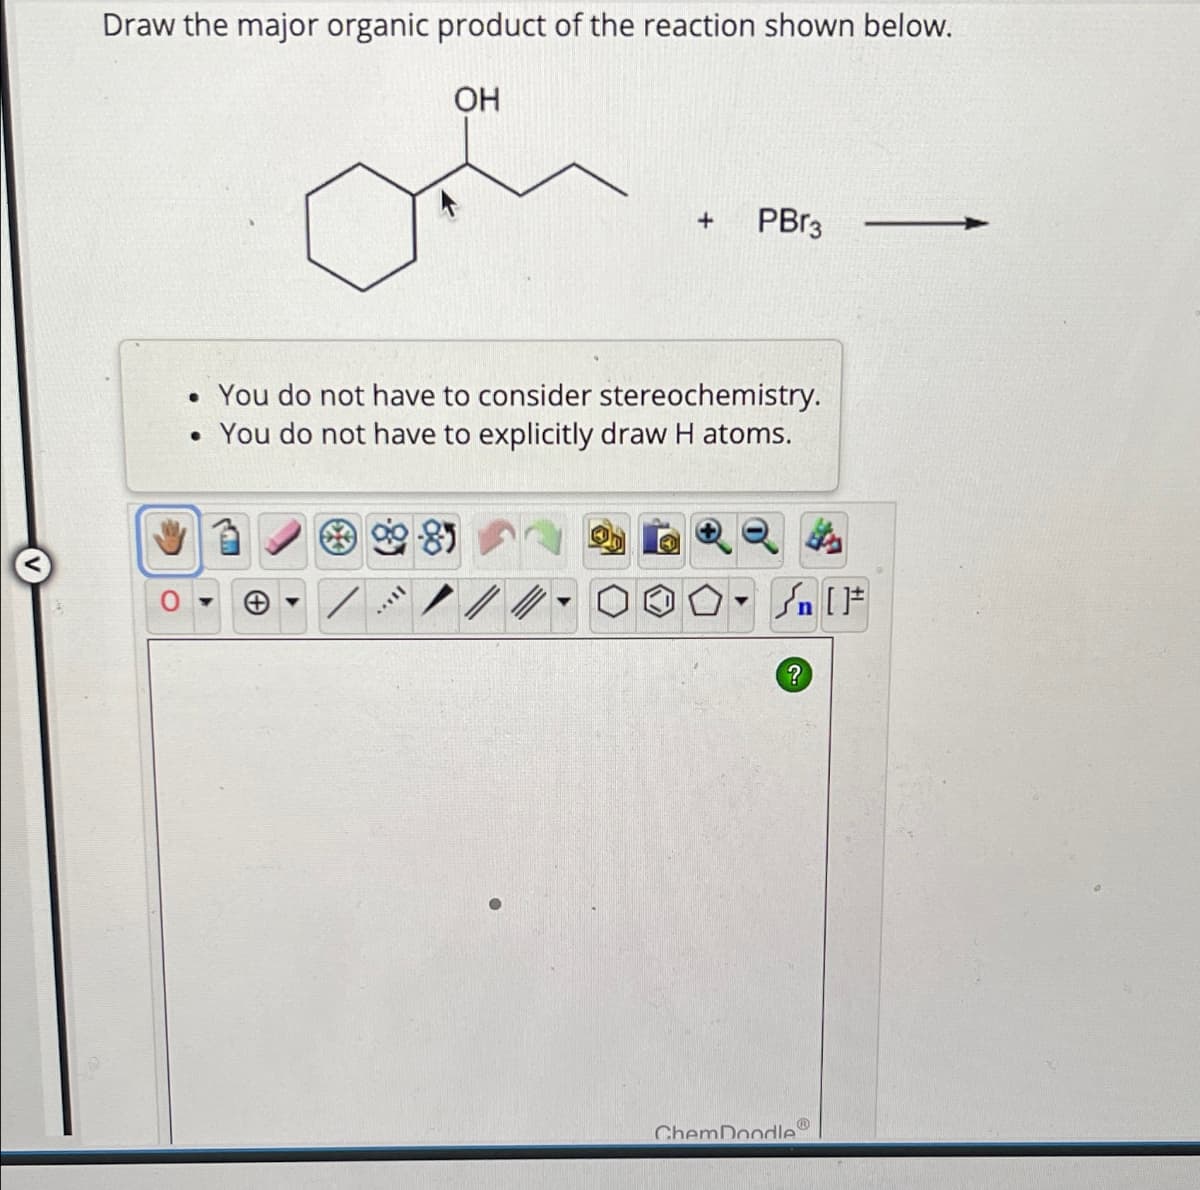 Draw the major organic product of the reaction shown below.
OH
+
PBг3
. You do not have to consider stereochemistry.
• You do not have to explicitly draw H atoms.
?
ChemDoodle